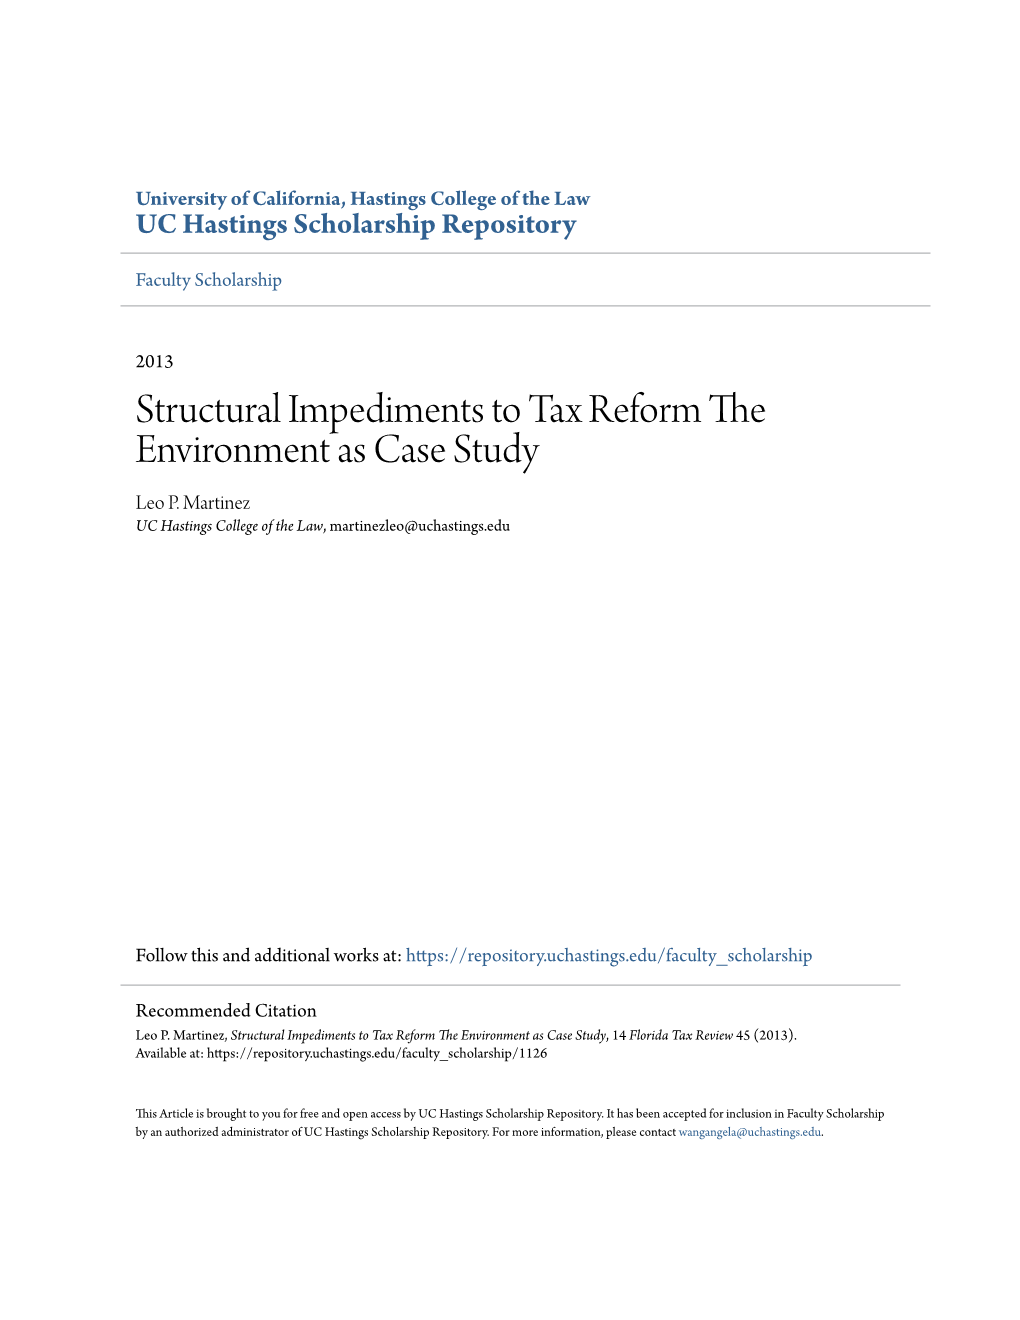 Structural Impediments to Tax Reform the Environment As Case Study Leo P